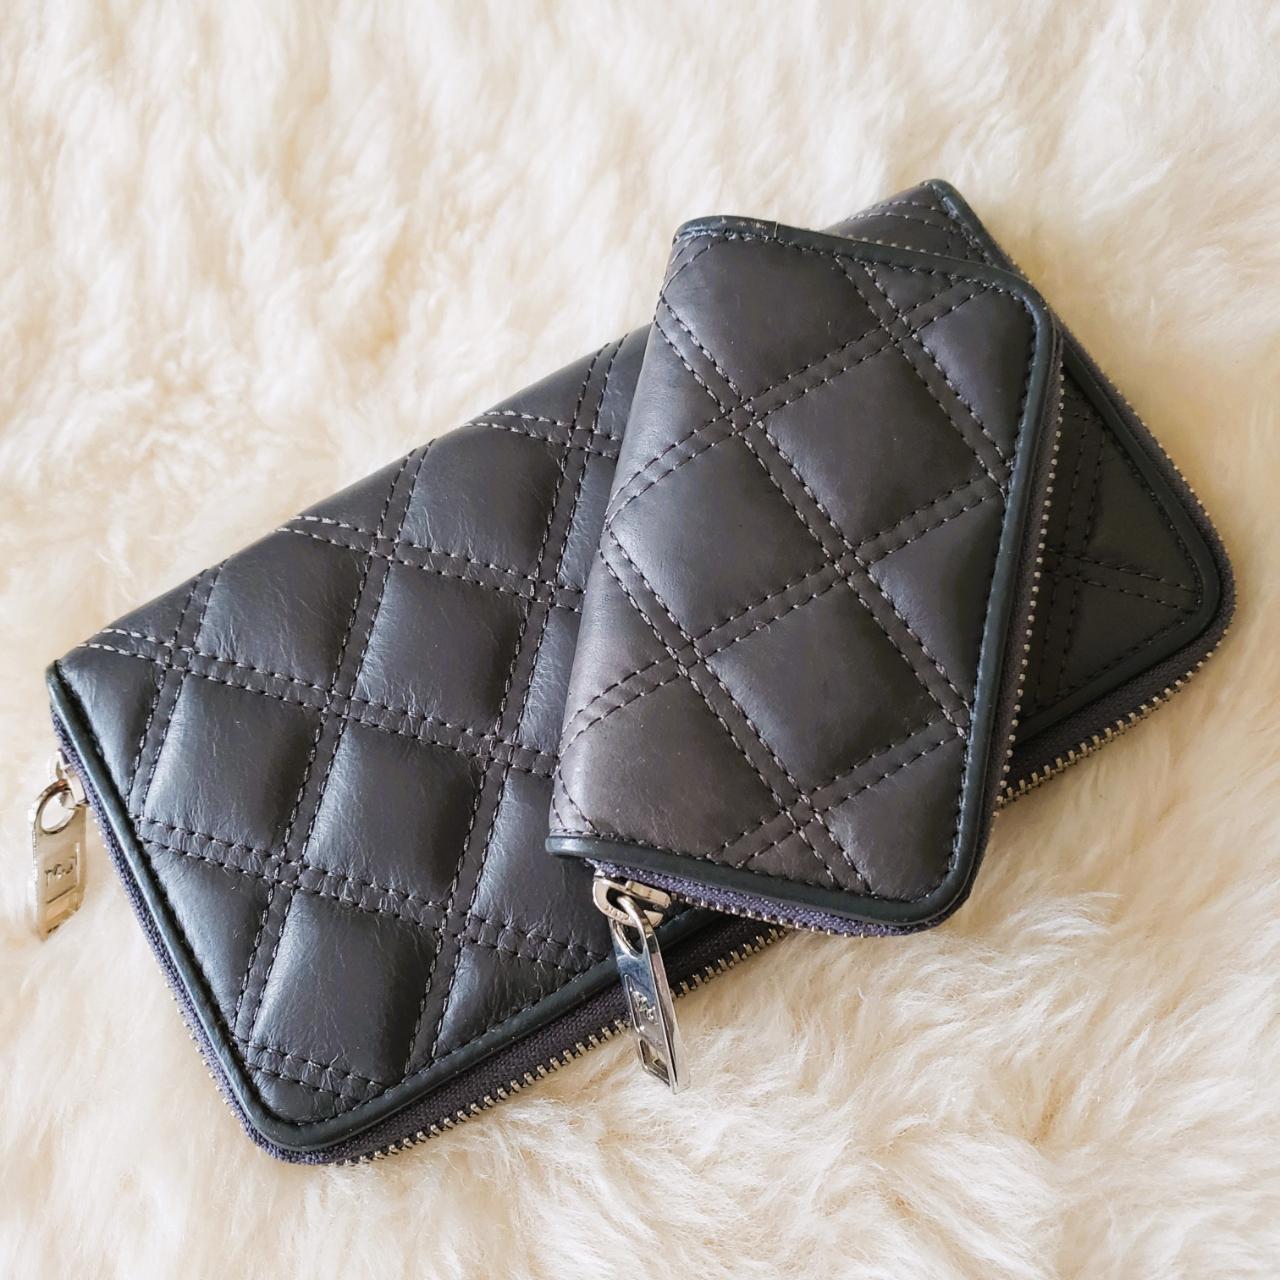 The Marc Jacobs Quilted Leather Card Case in Black